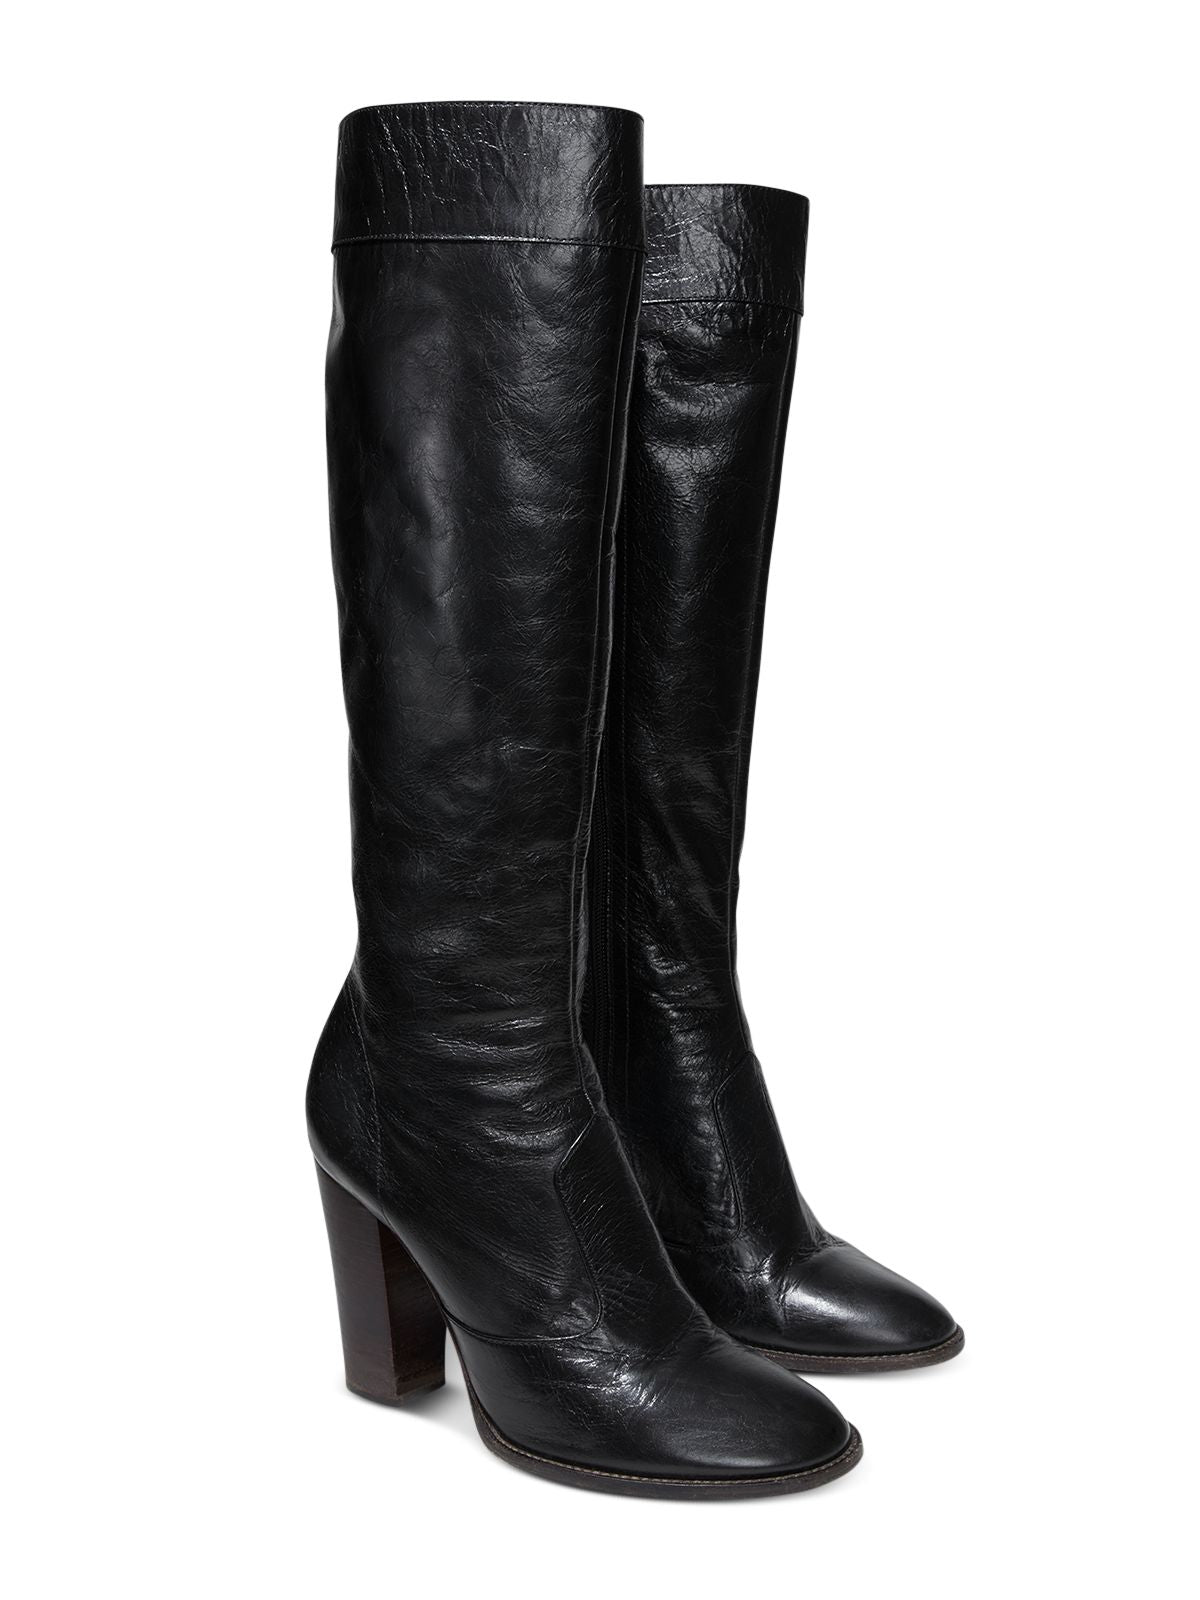 MARC JACOBS Womens Black Padded The Boot Round Toe Stacked Heel Zip-Up Leather Dress Boots 40